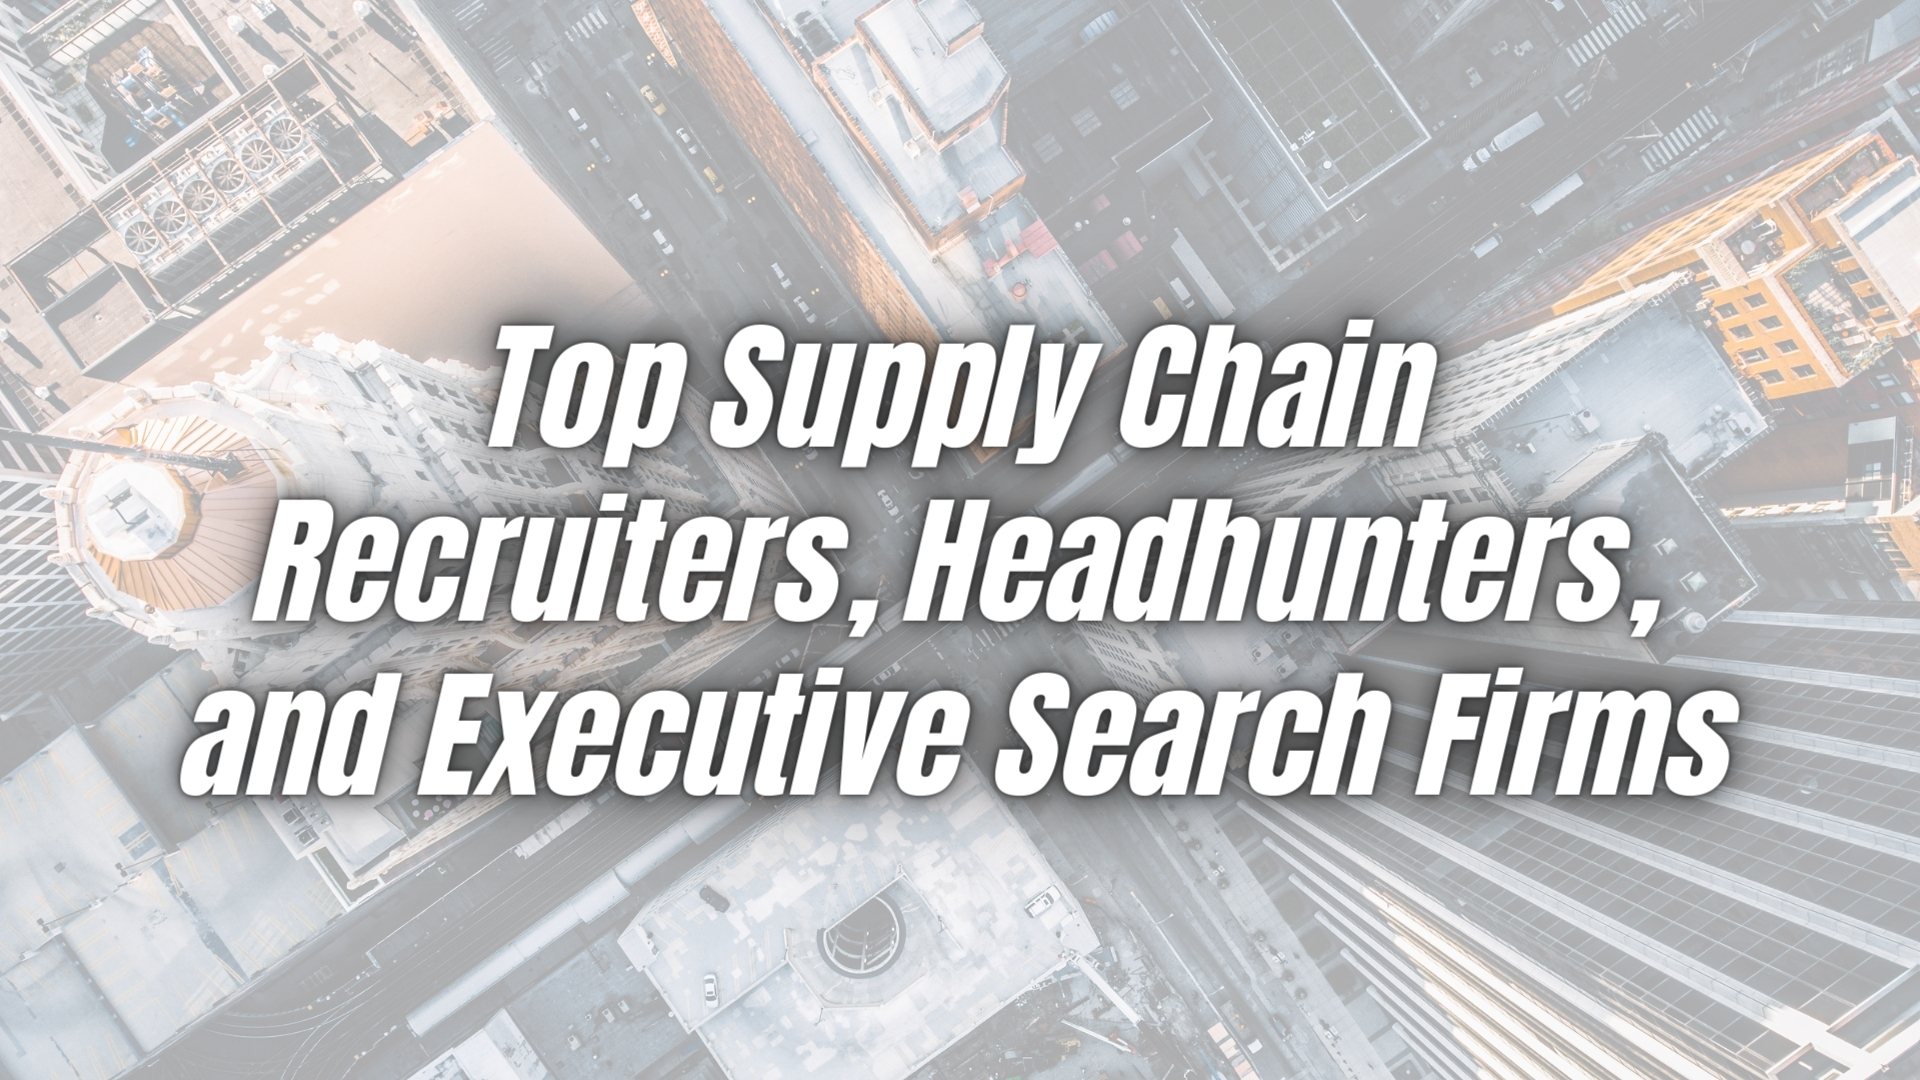 top-supply-chain-recruiters-headhunters-and-executive-search-firms